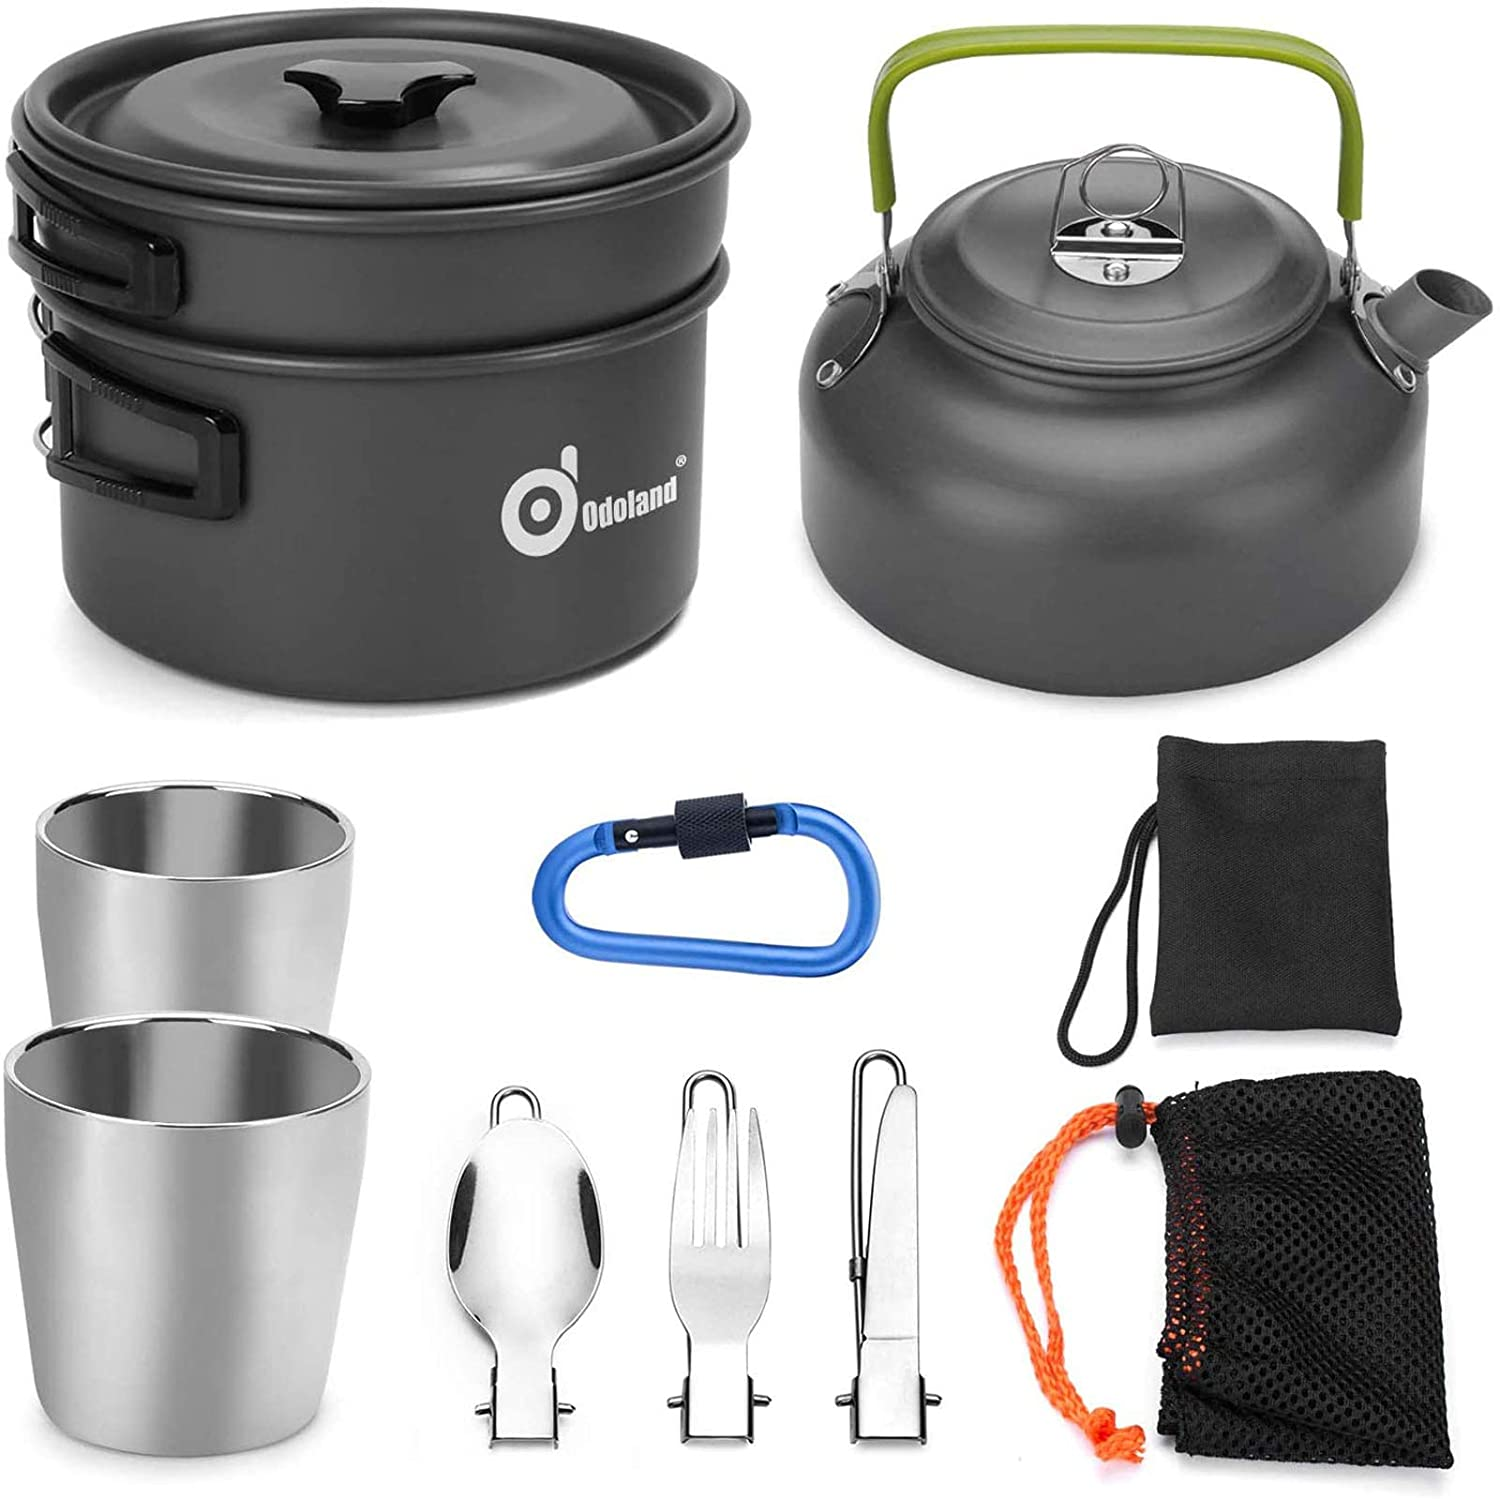 Odoland 14pcs Camping Cookware, Cooking Utensil Set, Stainless Steel,  Portable and Compact Carry Case, Outdoor Travel Kitchen Kit for Grilling